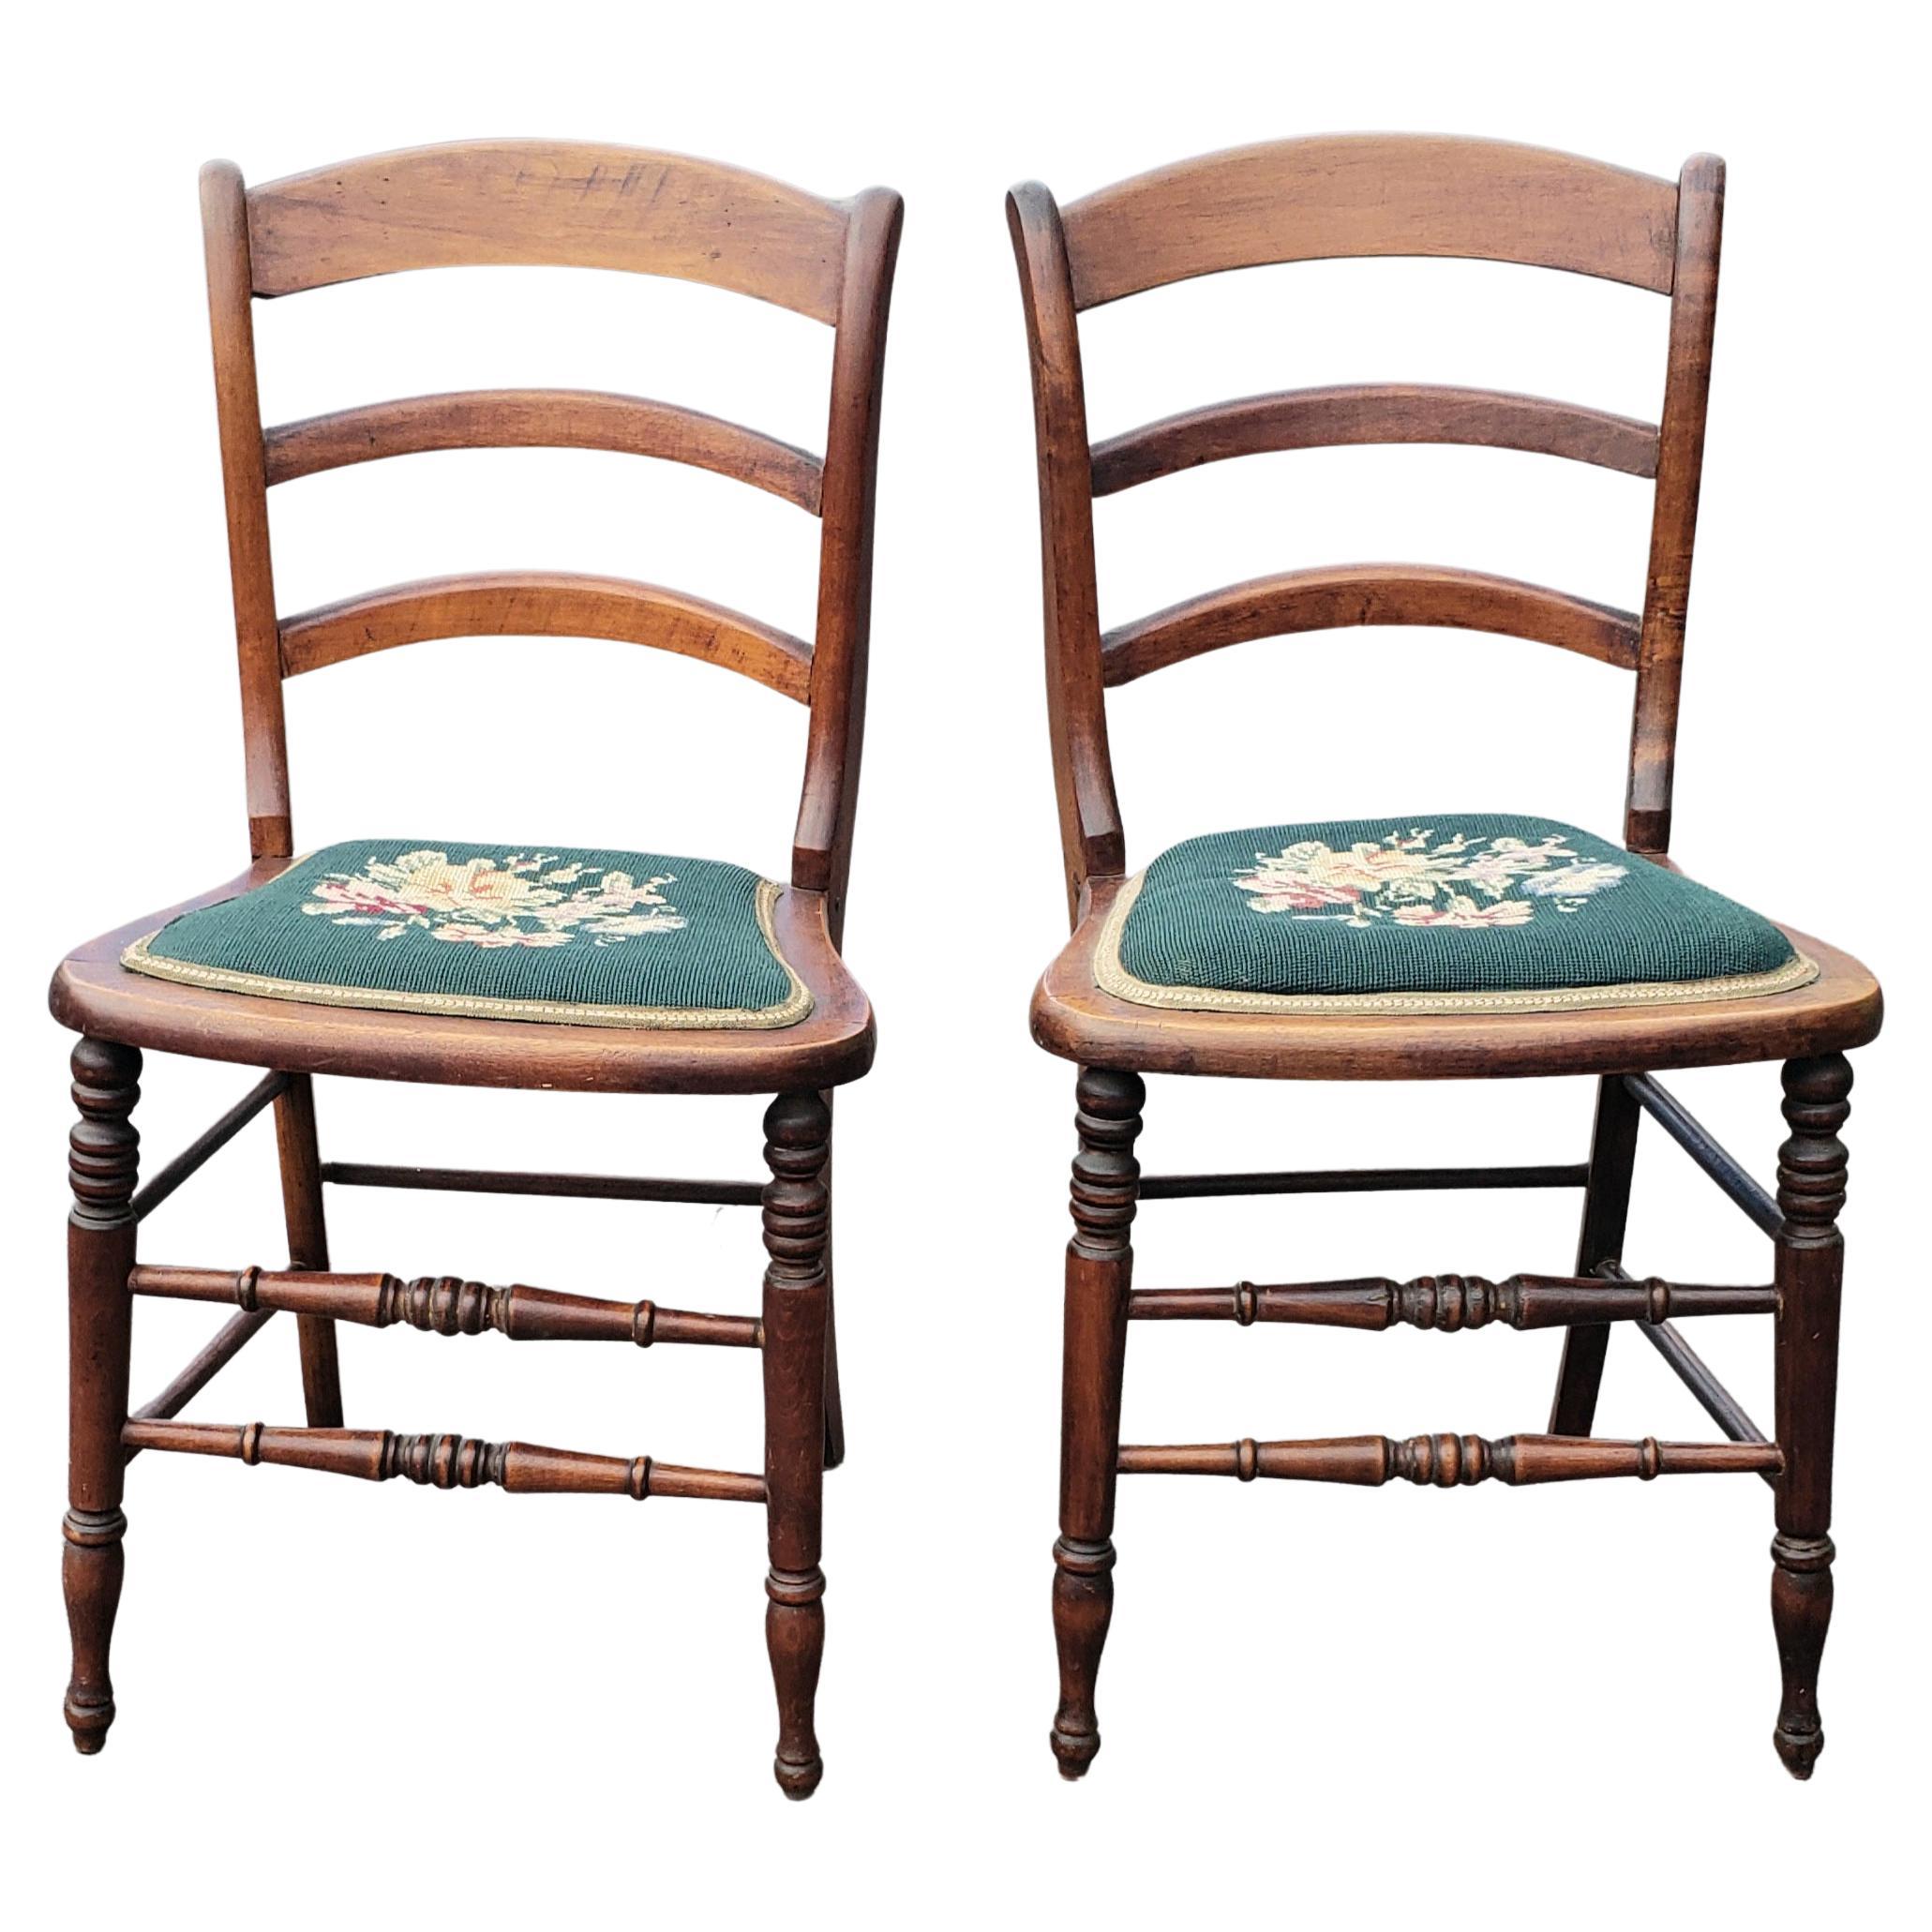 A pair of early 20th century Victorian style ladder back walnut and Needlepoint upholstered seat side chairs in very good vintage condition.